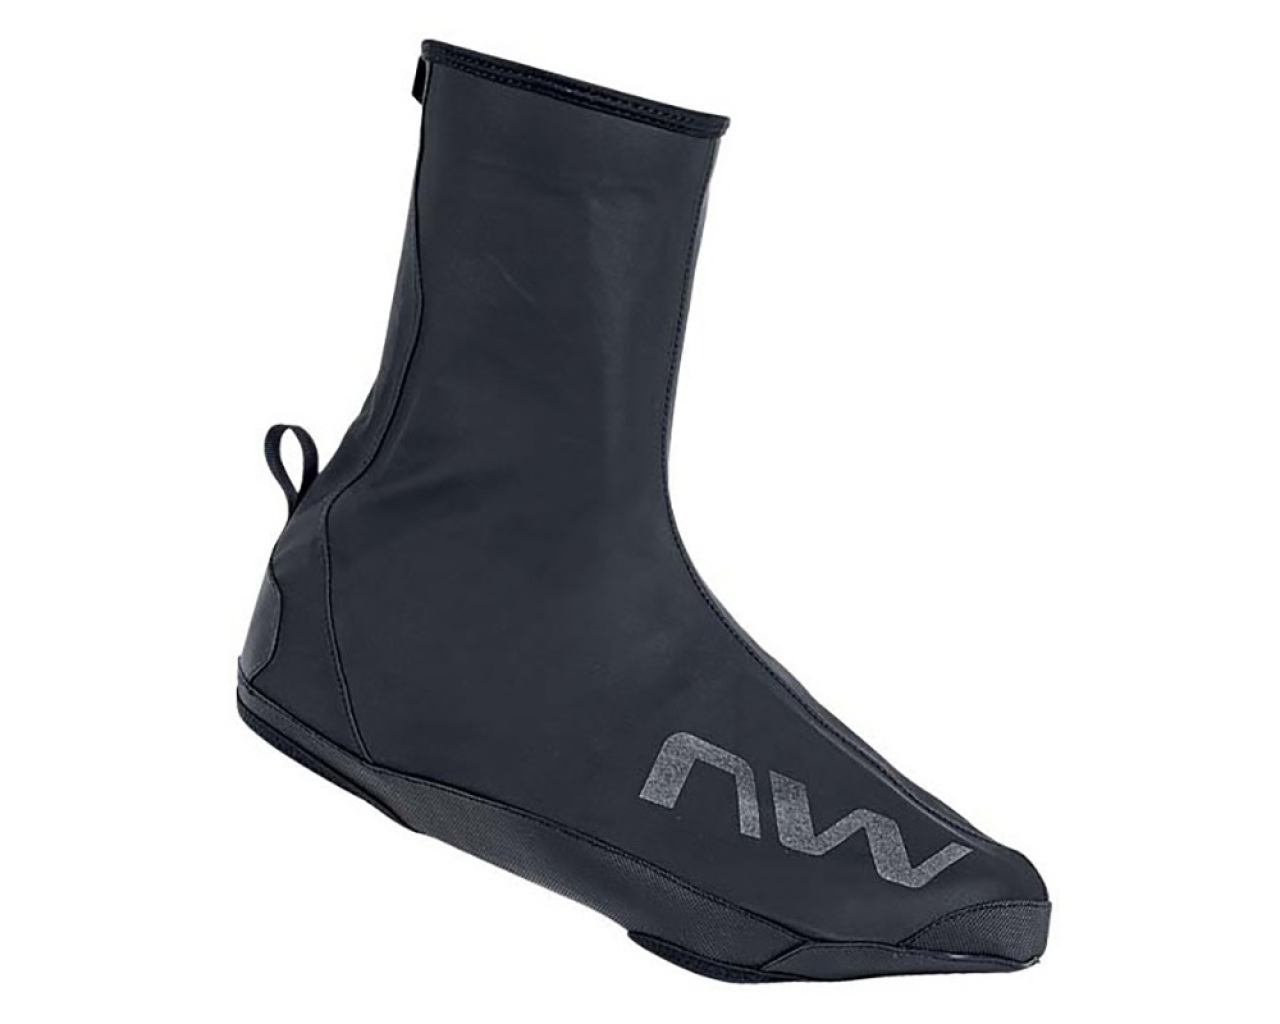 northwave-extreme-h20-shoecover-fw21-merlin-cycles